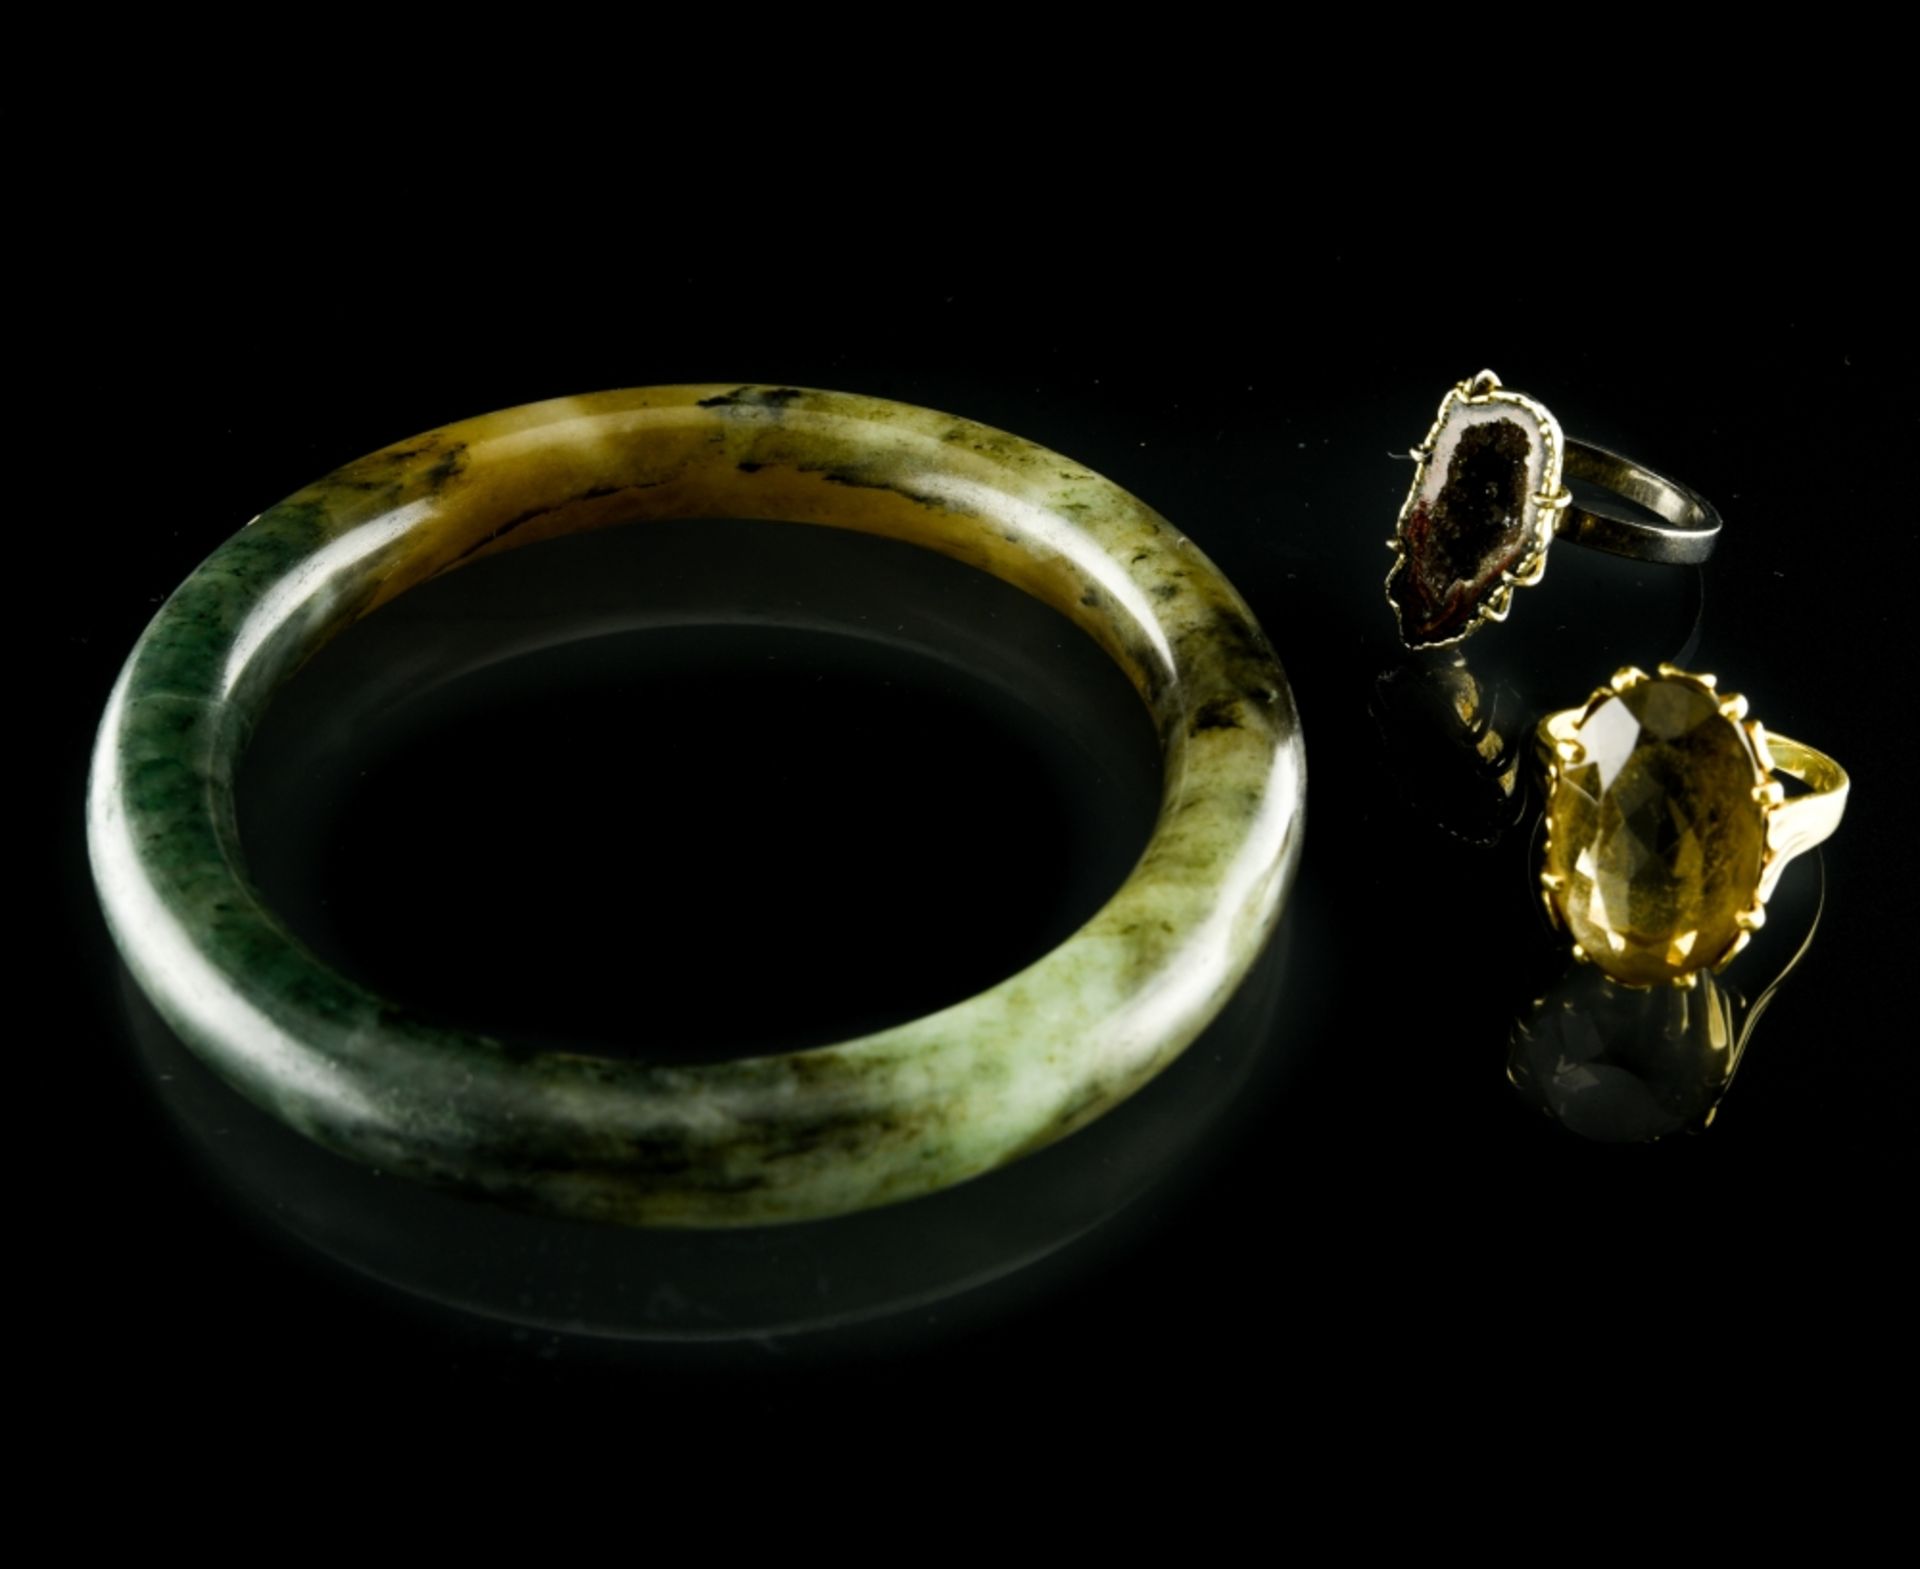 Lot of jewellery Includes: 1) An 18 kt yellow gold ring set with an oval smoky quartz. 1950s work.